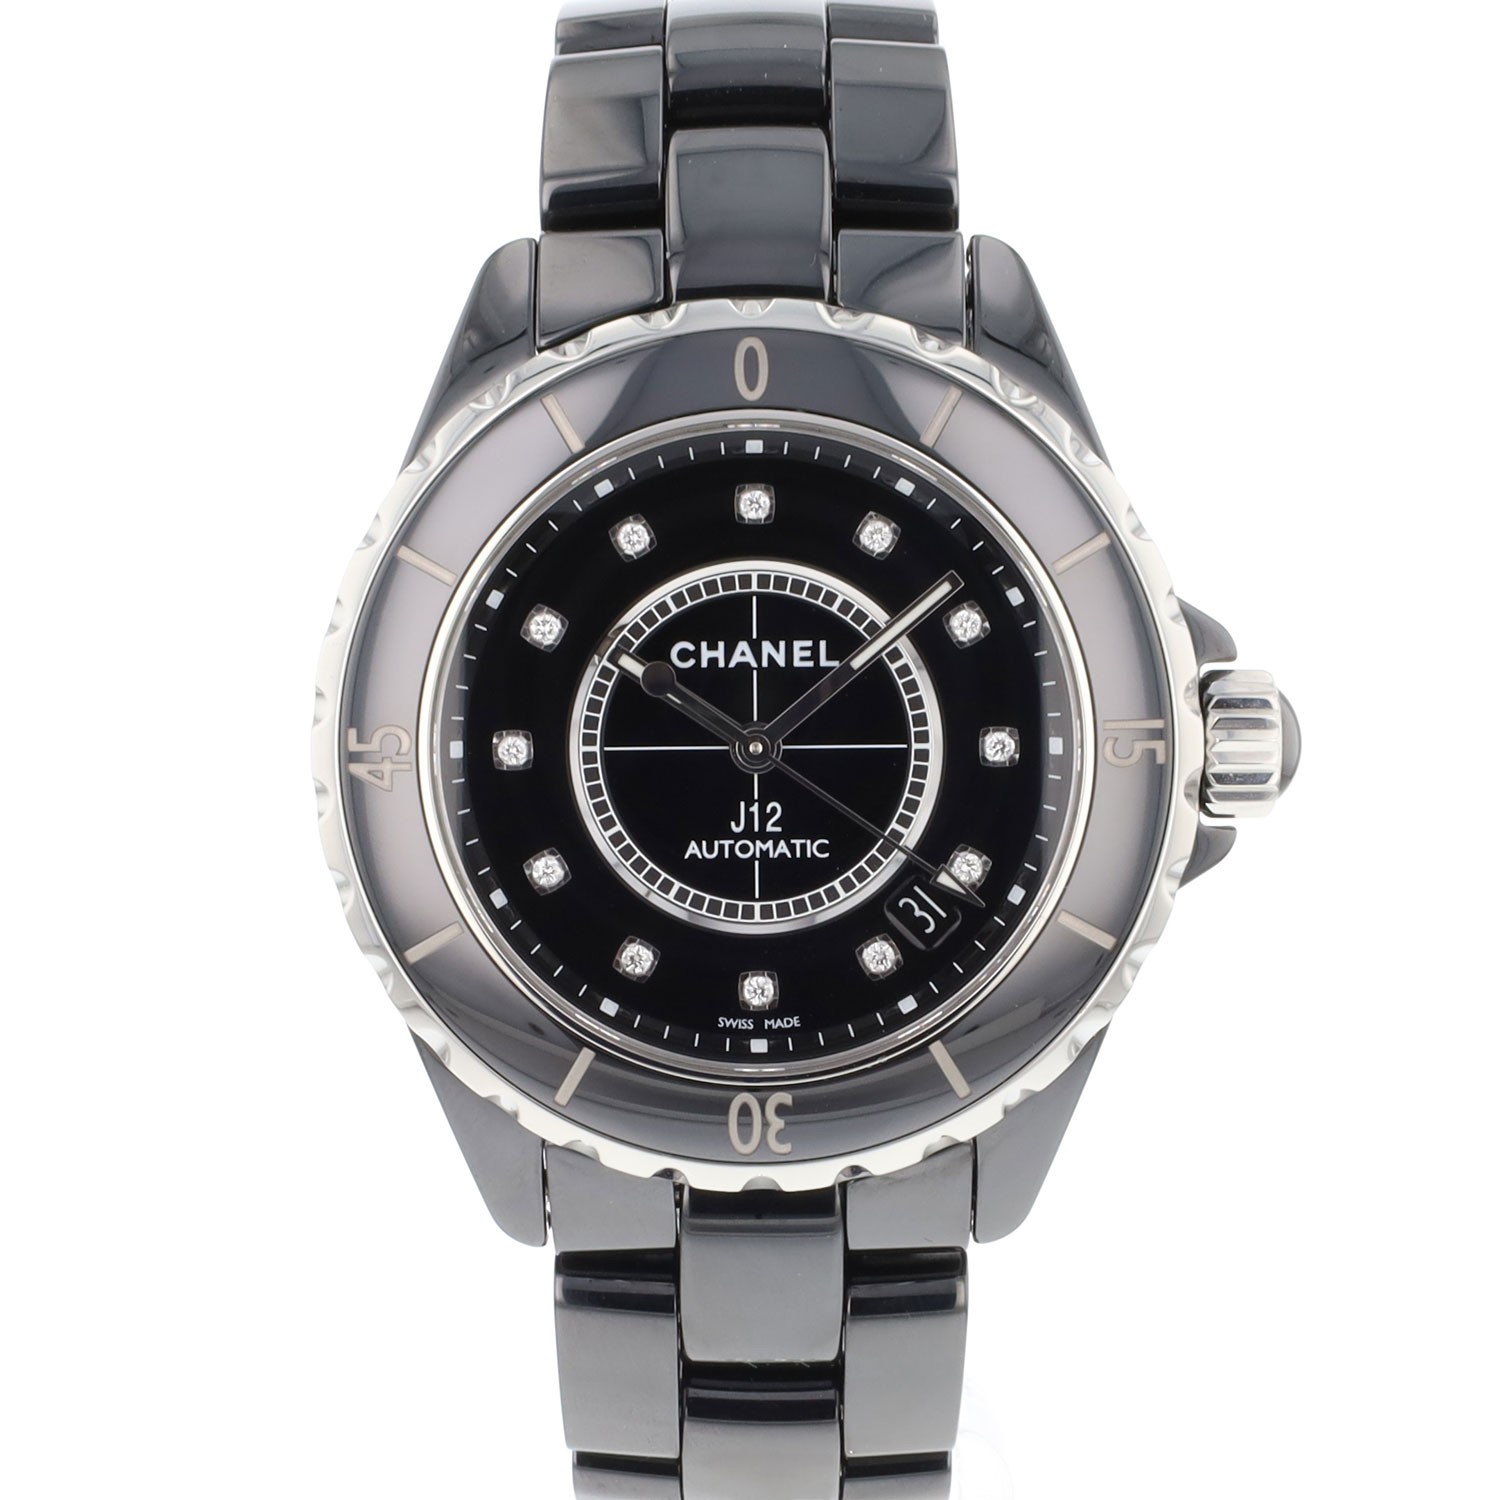 Chanel J12 for Rs.293,219 for sale from a Private Seller on Chrono24